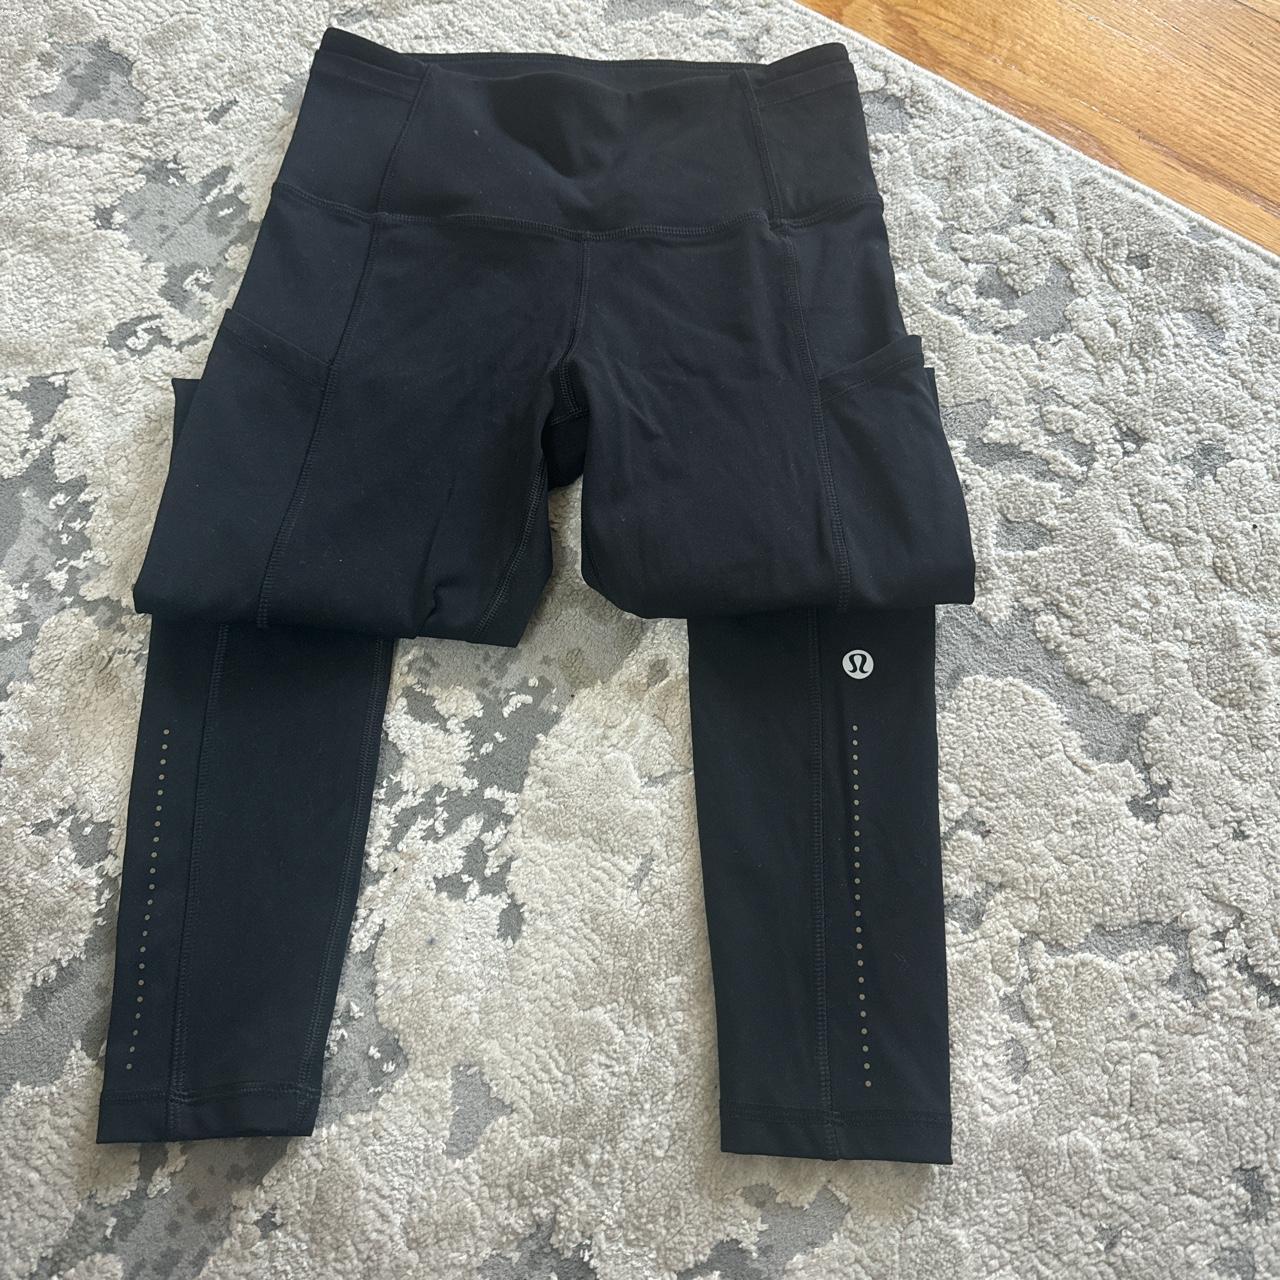 Lululemon “fast and free” leggings with pockets and - Depop